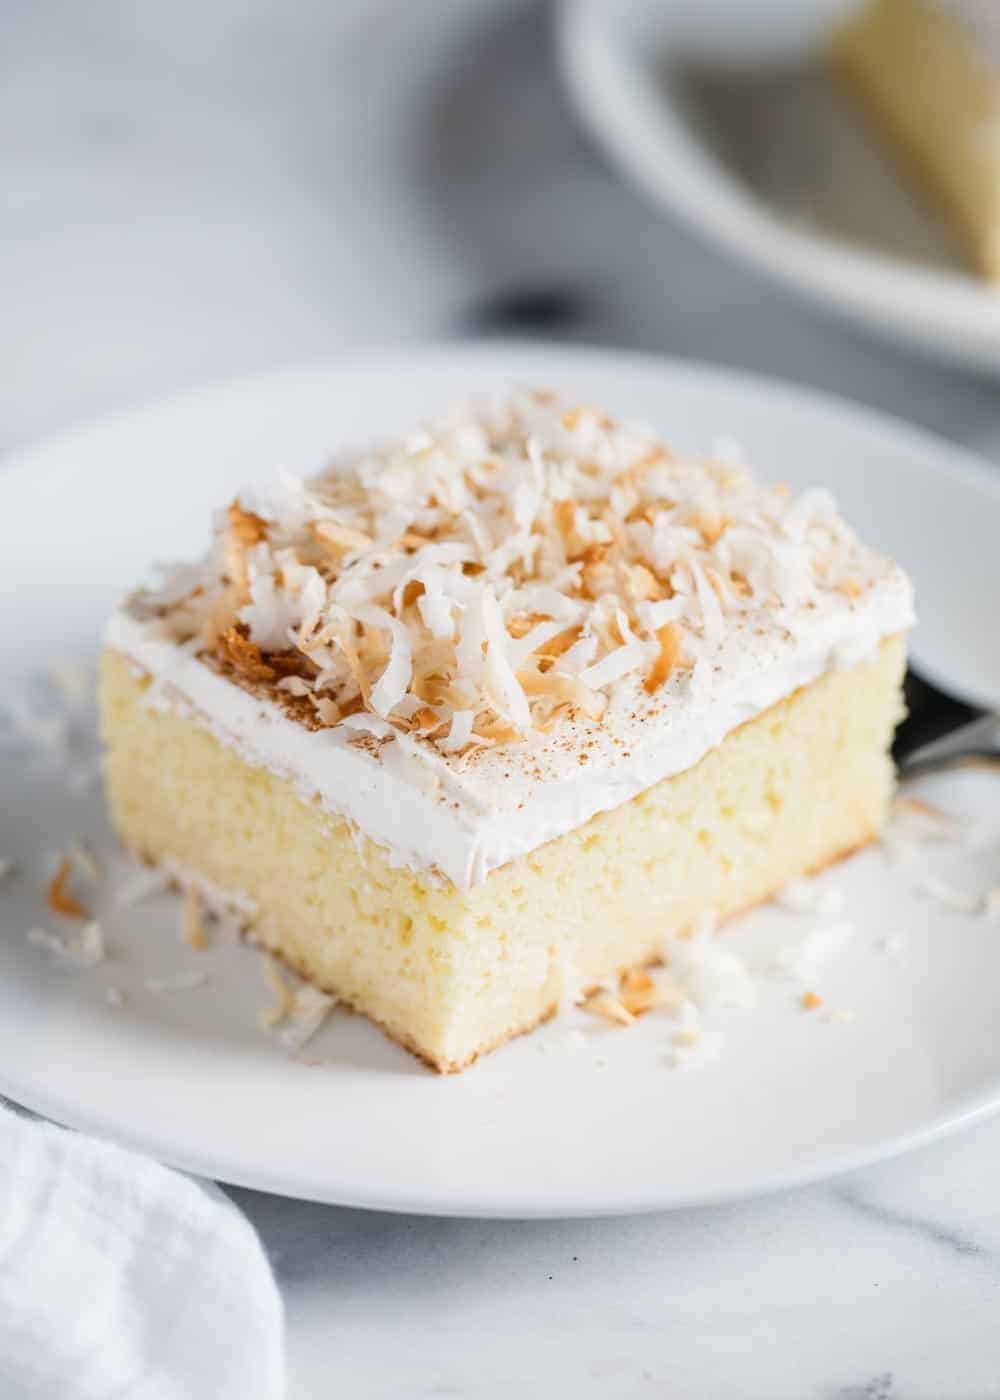 Slice of tres leches cake with toasted coconut on top.